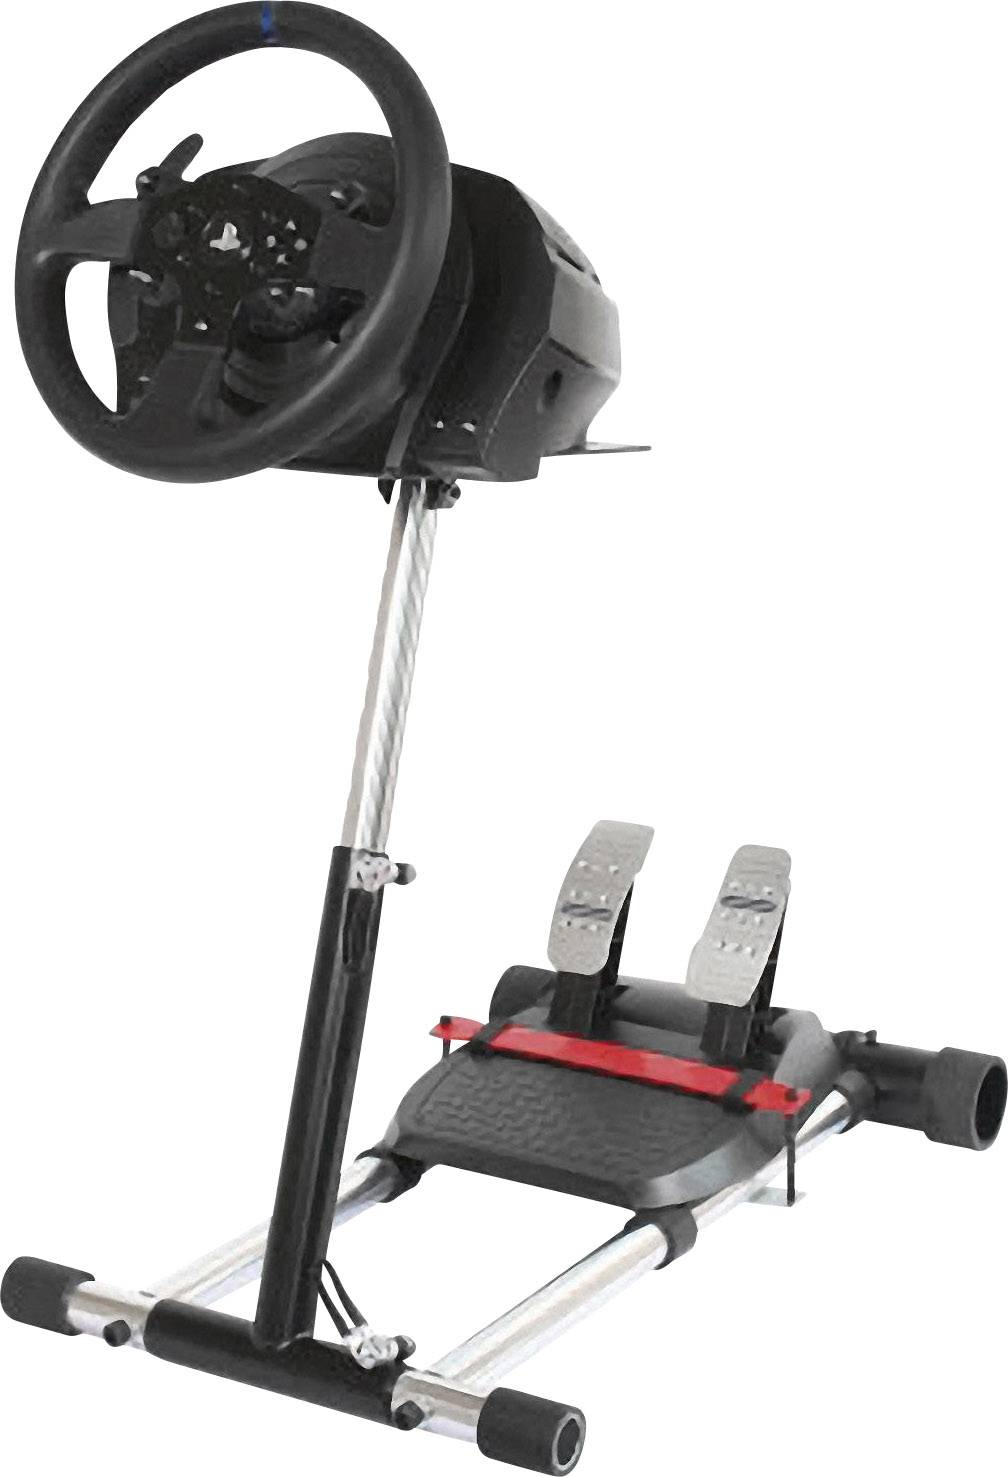 Wheel Stand Pro Thrustmaster TX/T300RS - Deluxe V2 Steering wheel mount